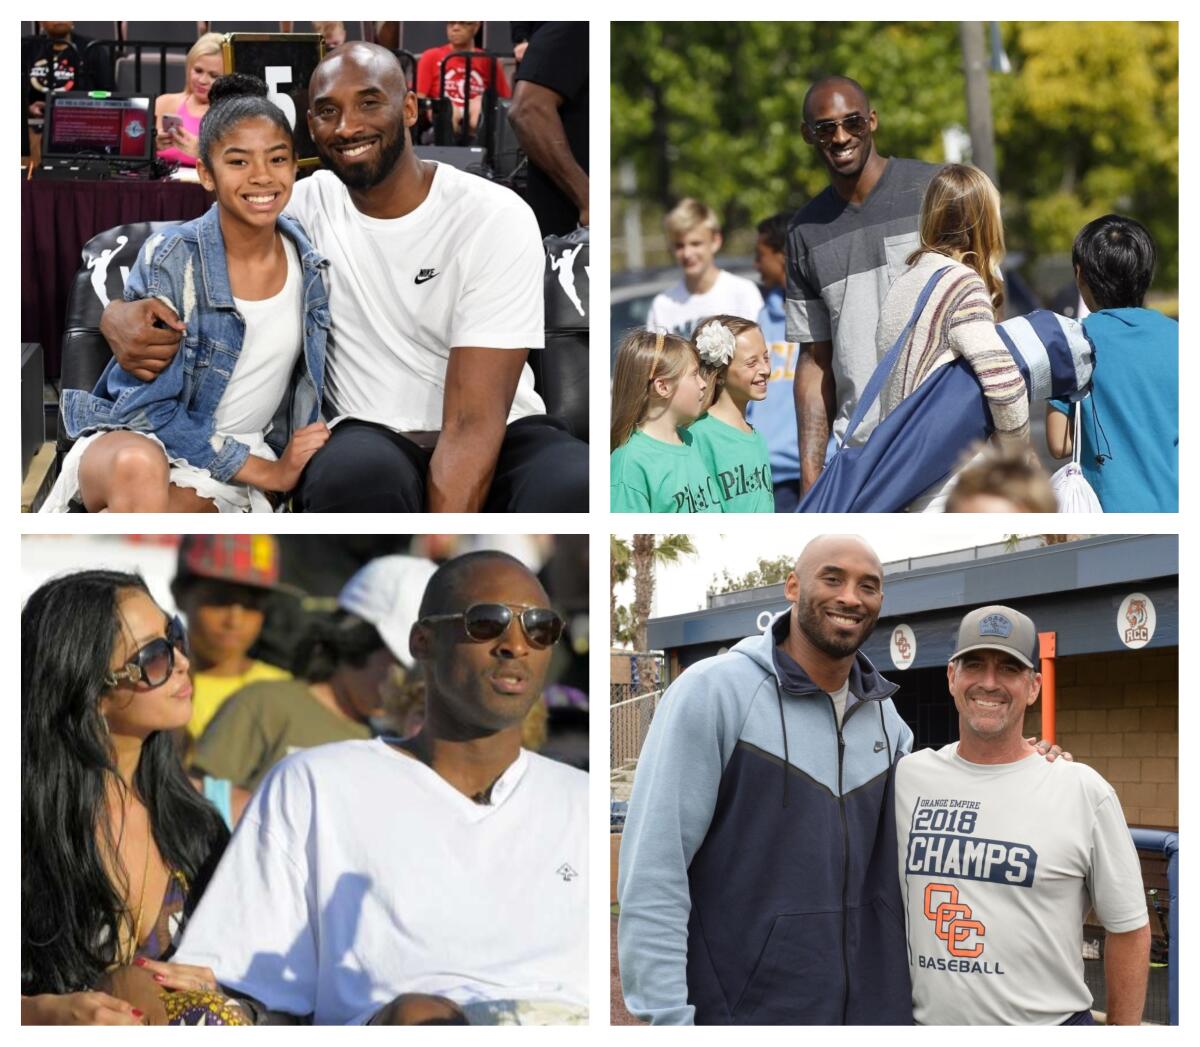 Kobe Bryant and his daughter Gianna, 13, were killed Sunday along with seven other local residents in a helicopter crash in Calabasas. Pictured clockwise from top left, Bryant and Gianna at the 2019 WNBA All-Star Game on July 27 in Las Vegas; Bryant greets others attending a Daily Pilot Cup soccer game in 2013; Bryant and Orange Coast College baseball coach John Altobelli, another of the crash victims; and Bryant and his wife, Vanessa, at a local event.